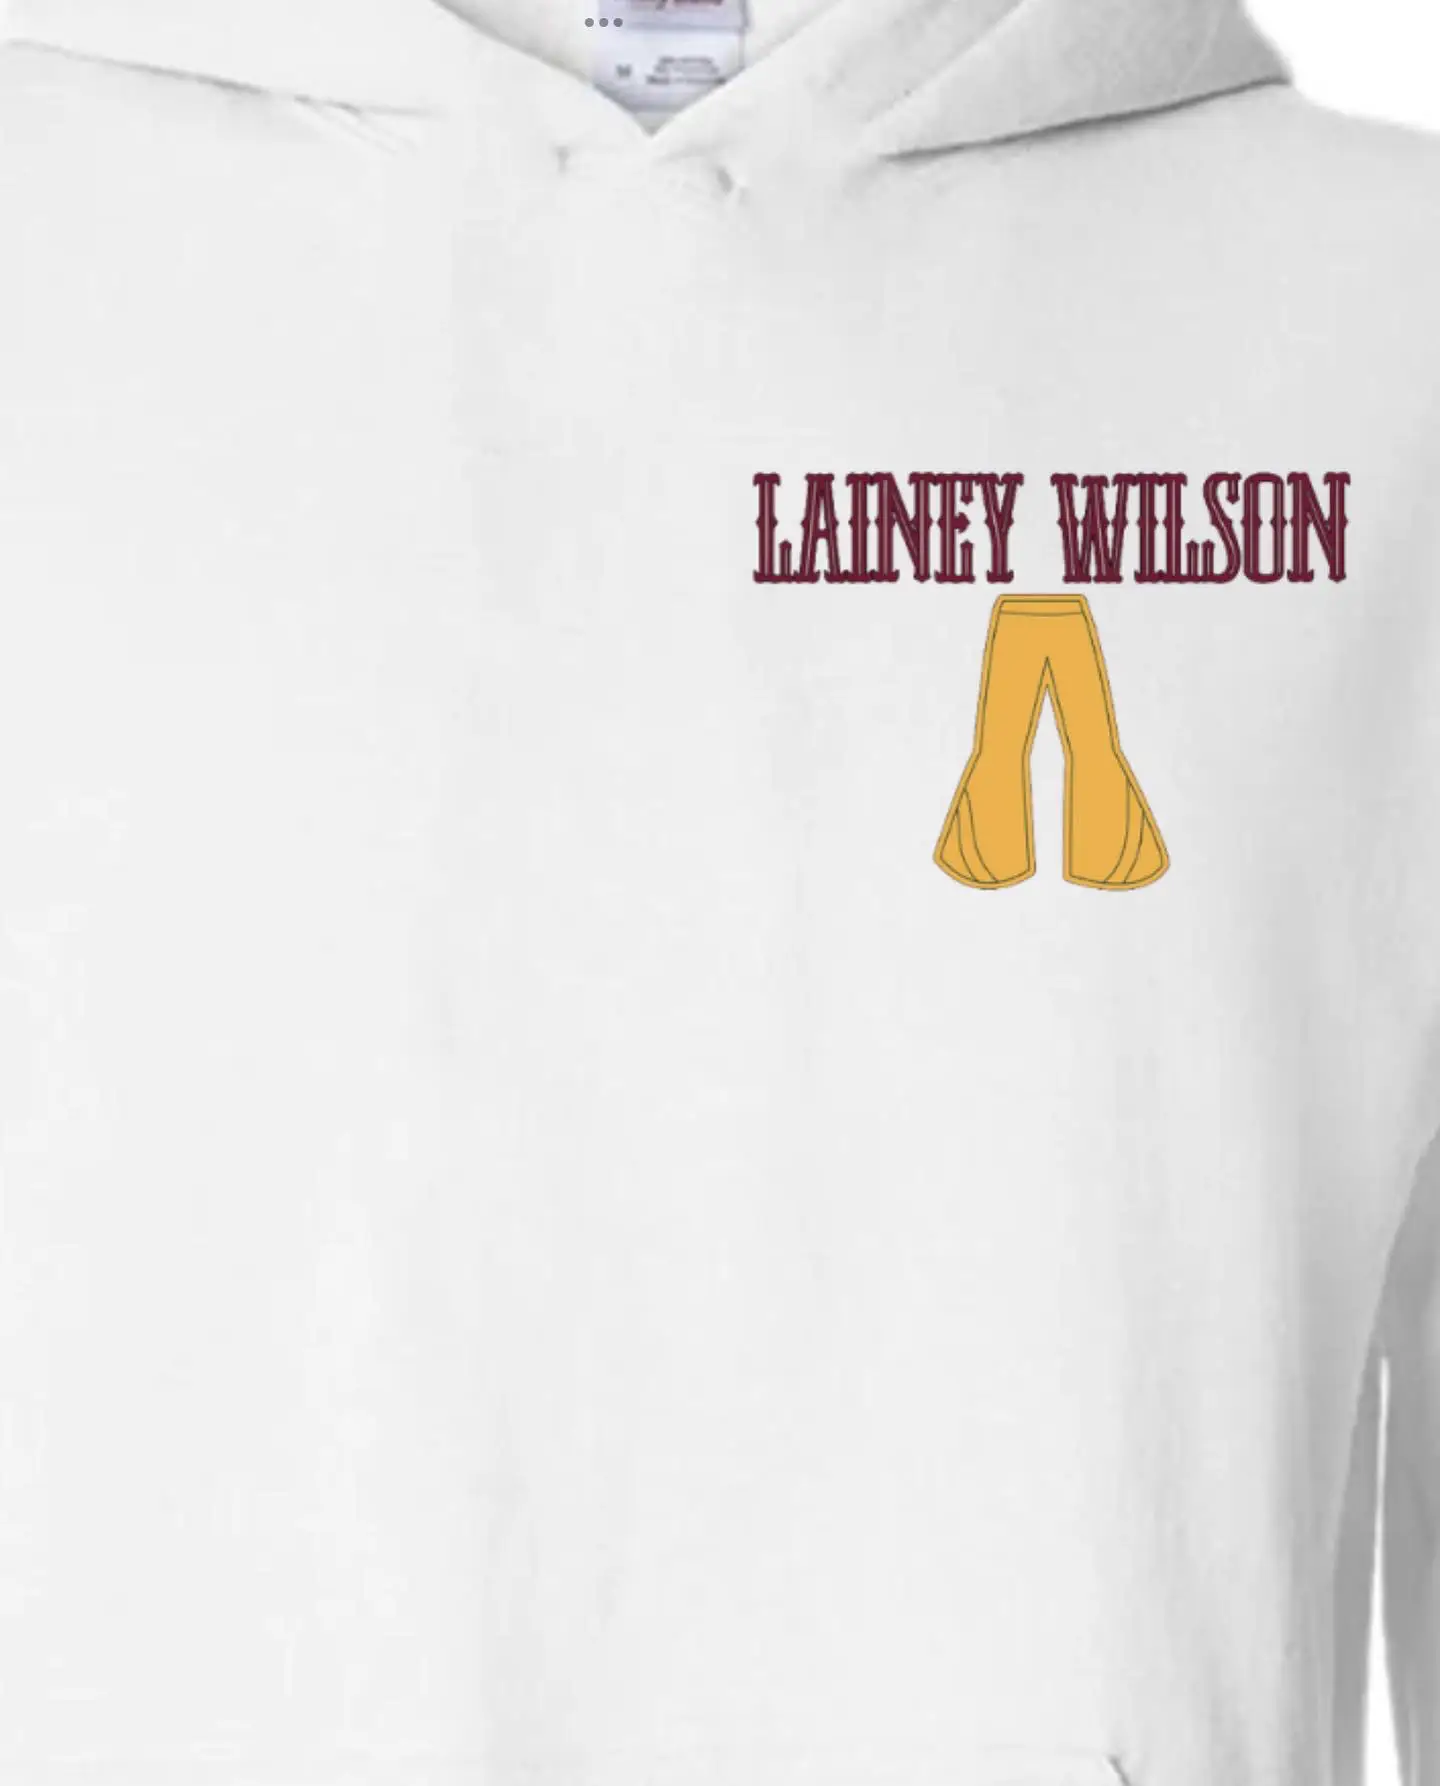 Lainey Wilson!!! Stanley!!!  Gallery posted by Hadlie